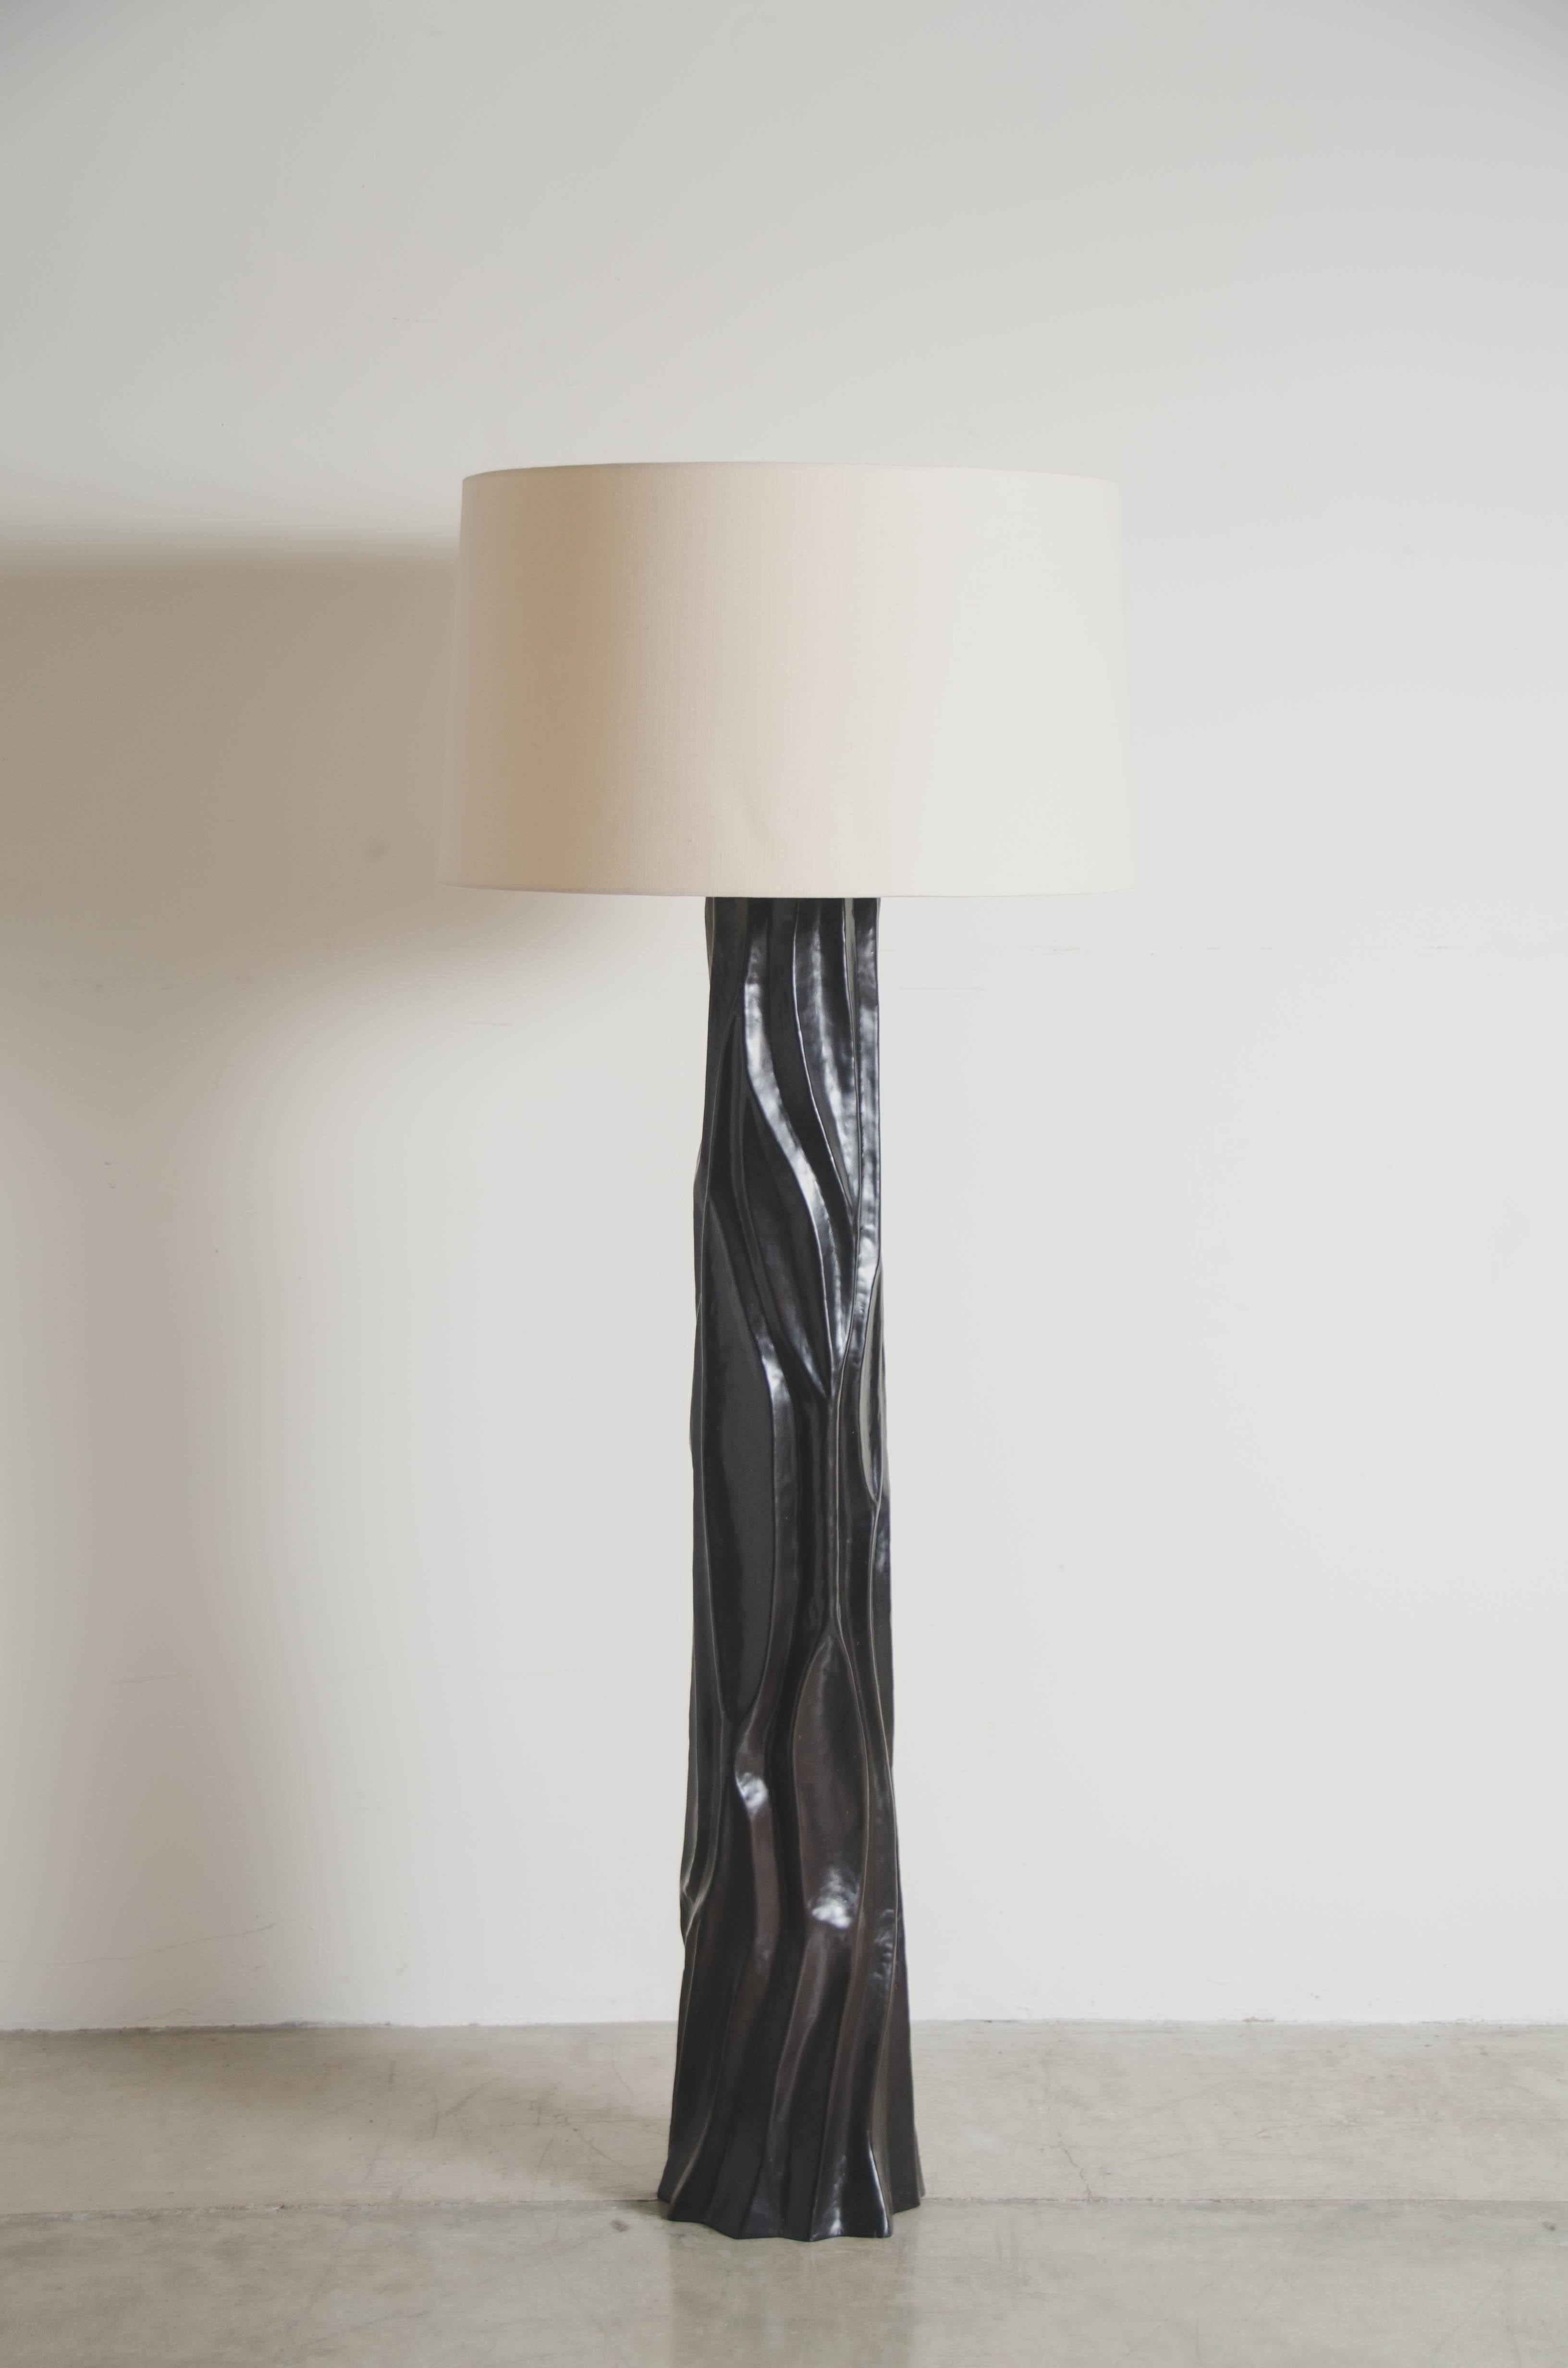 Tree trunk floor lamp
Black copper finish
Hand Repousse
Limited edition
Linen shade (24